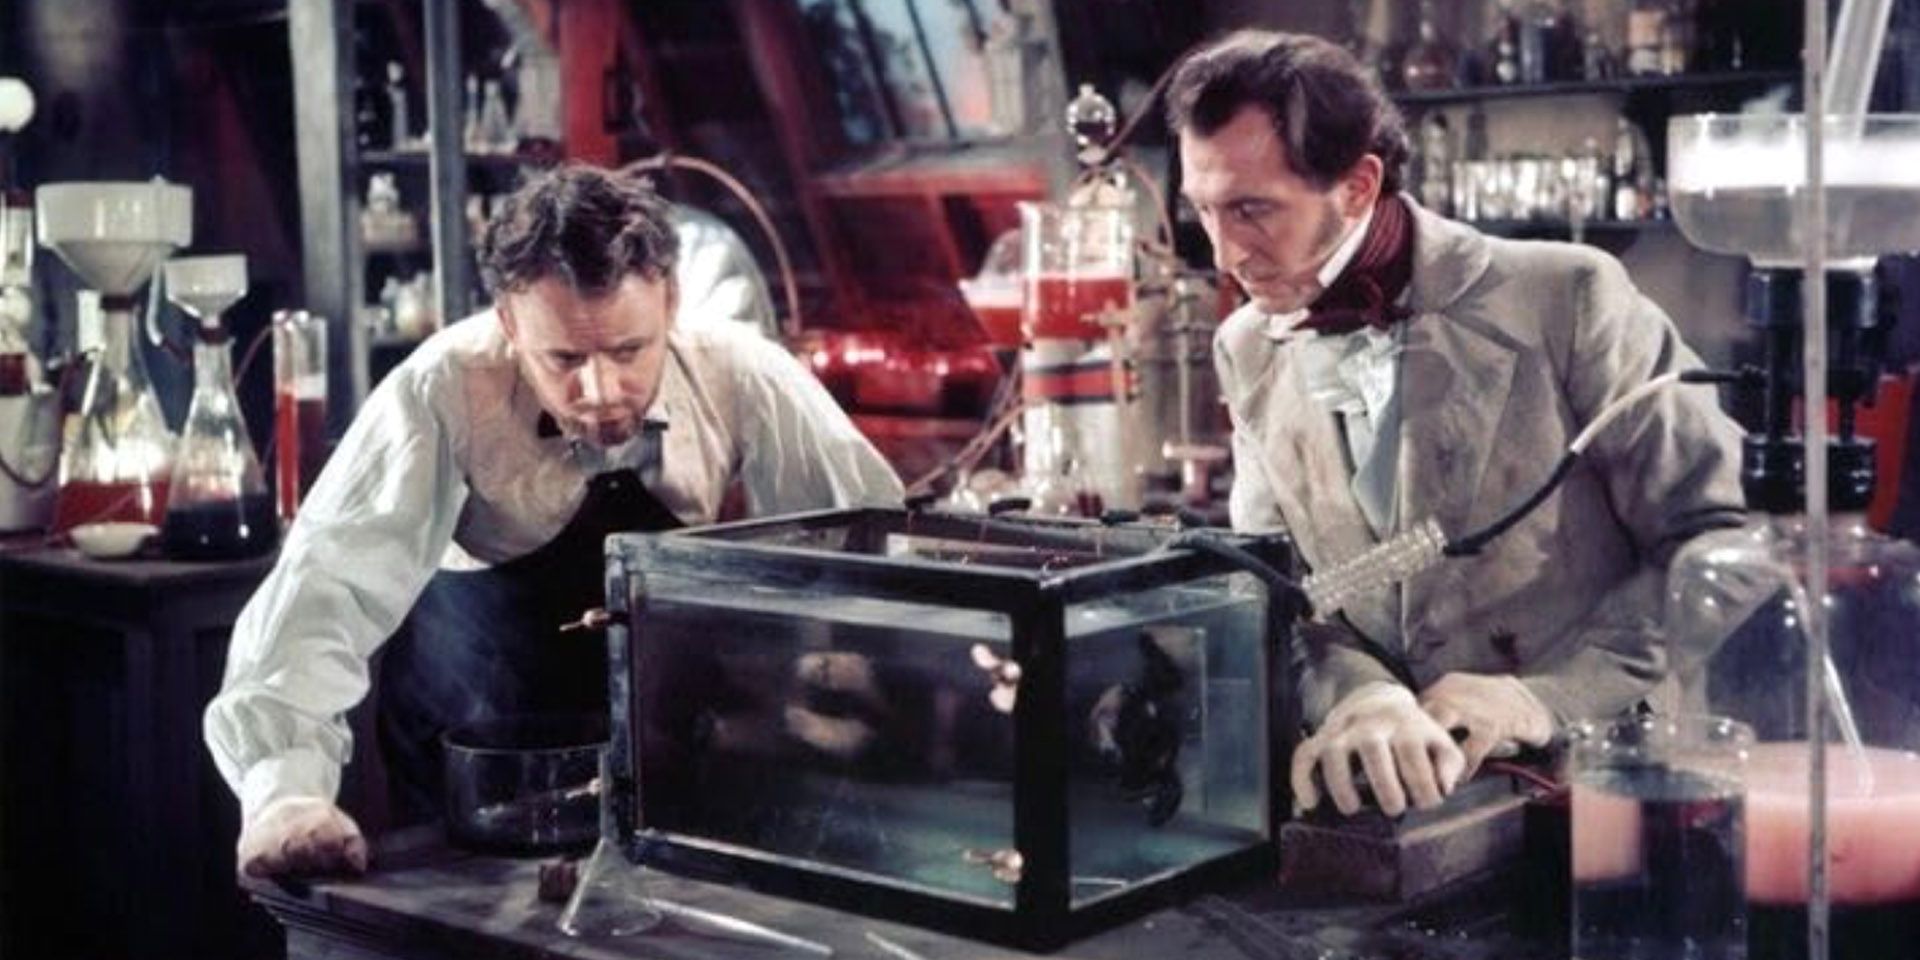 Baron Frankenstein and his assistant in The Curse of Frankenstein